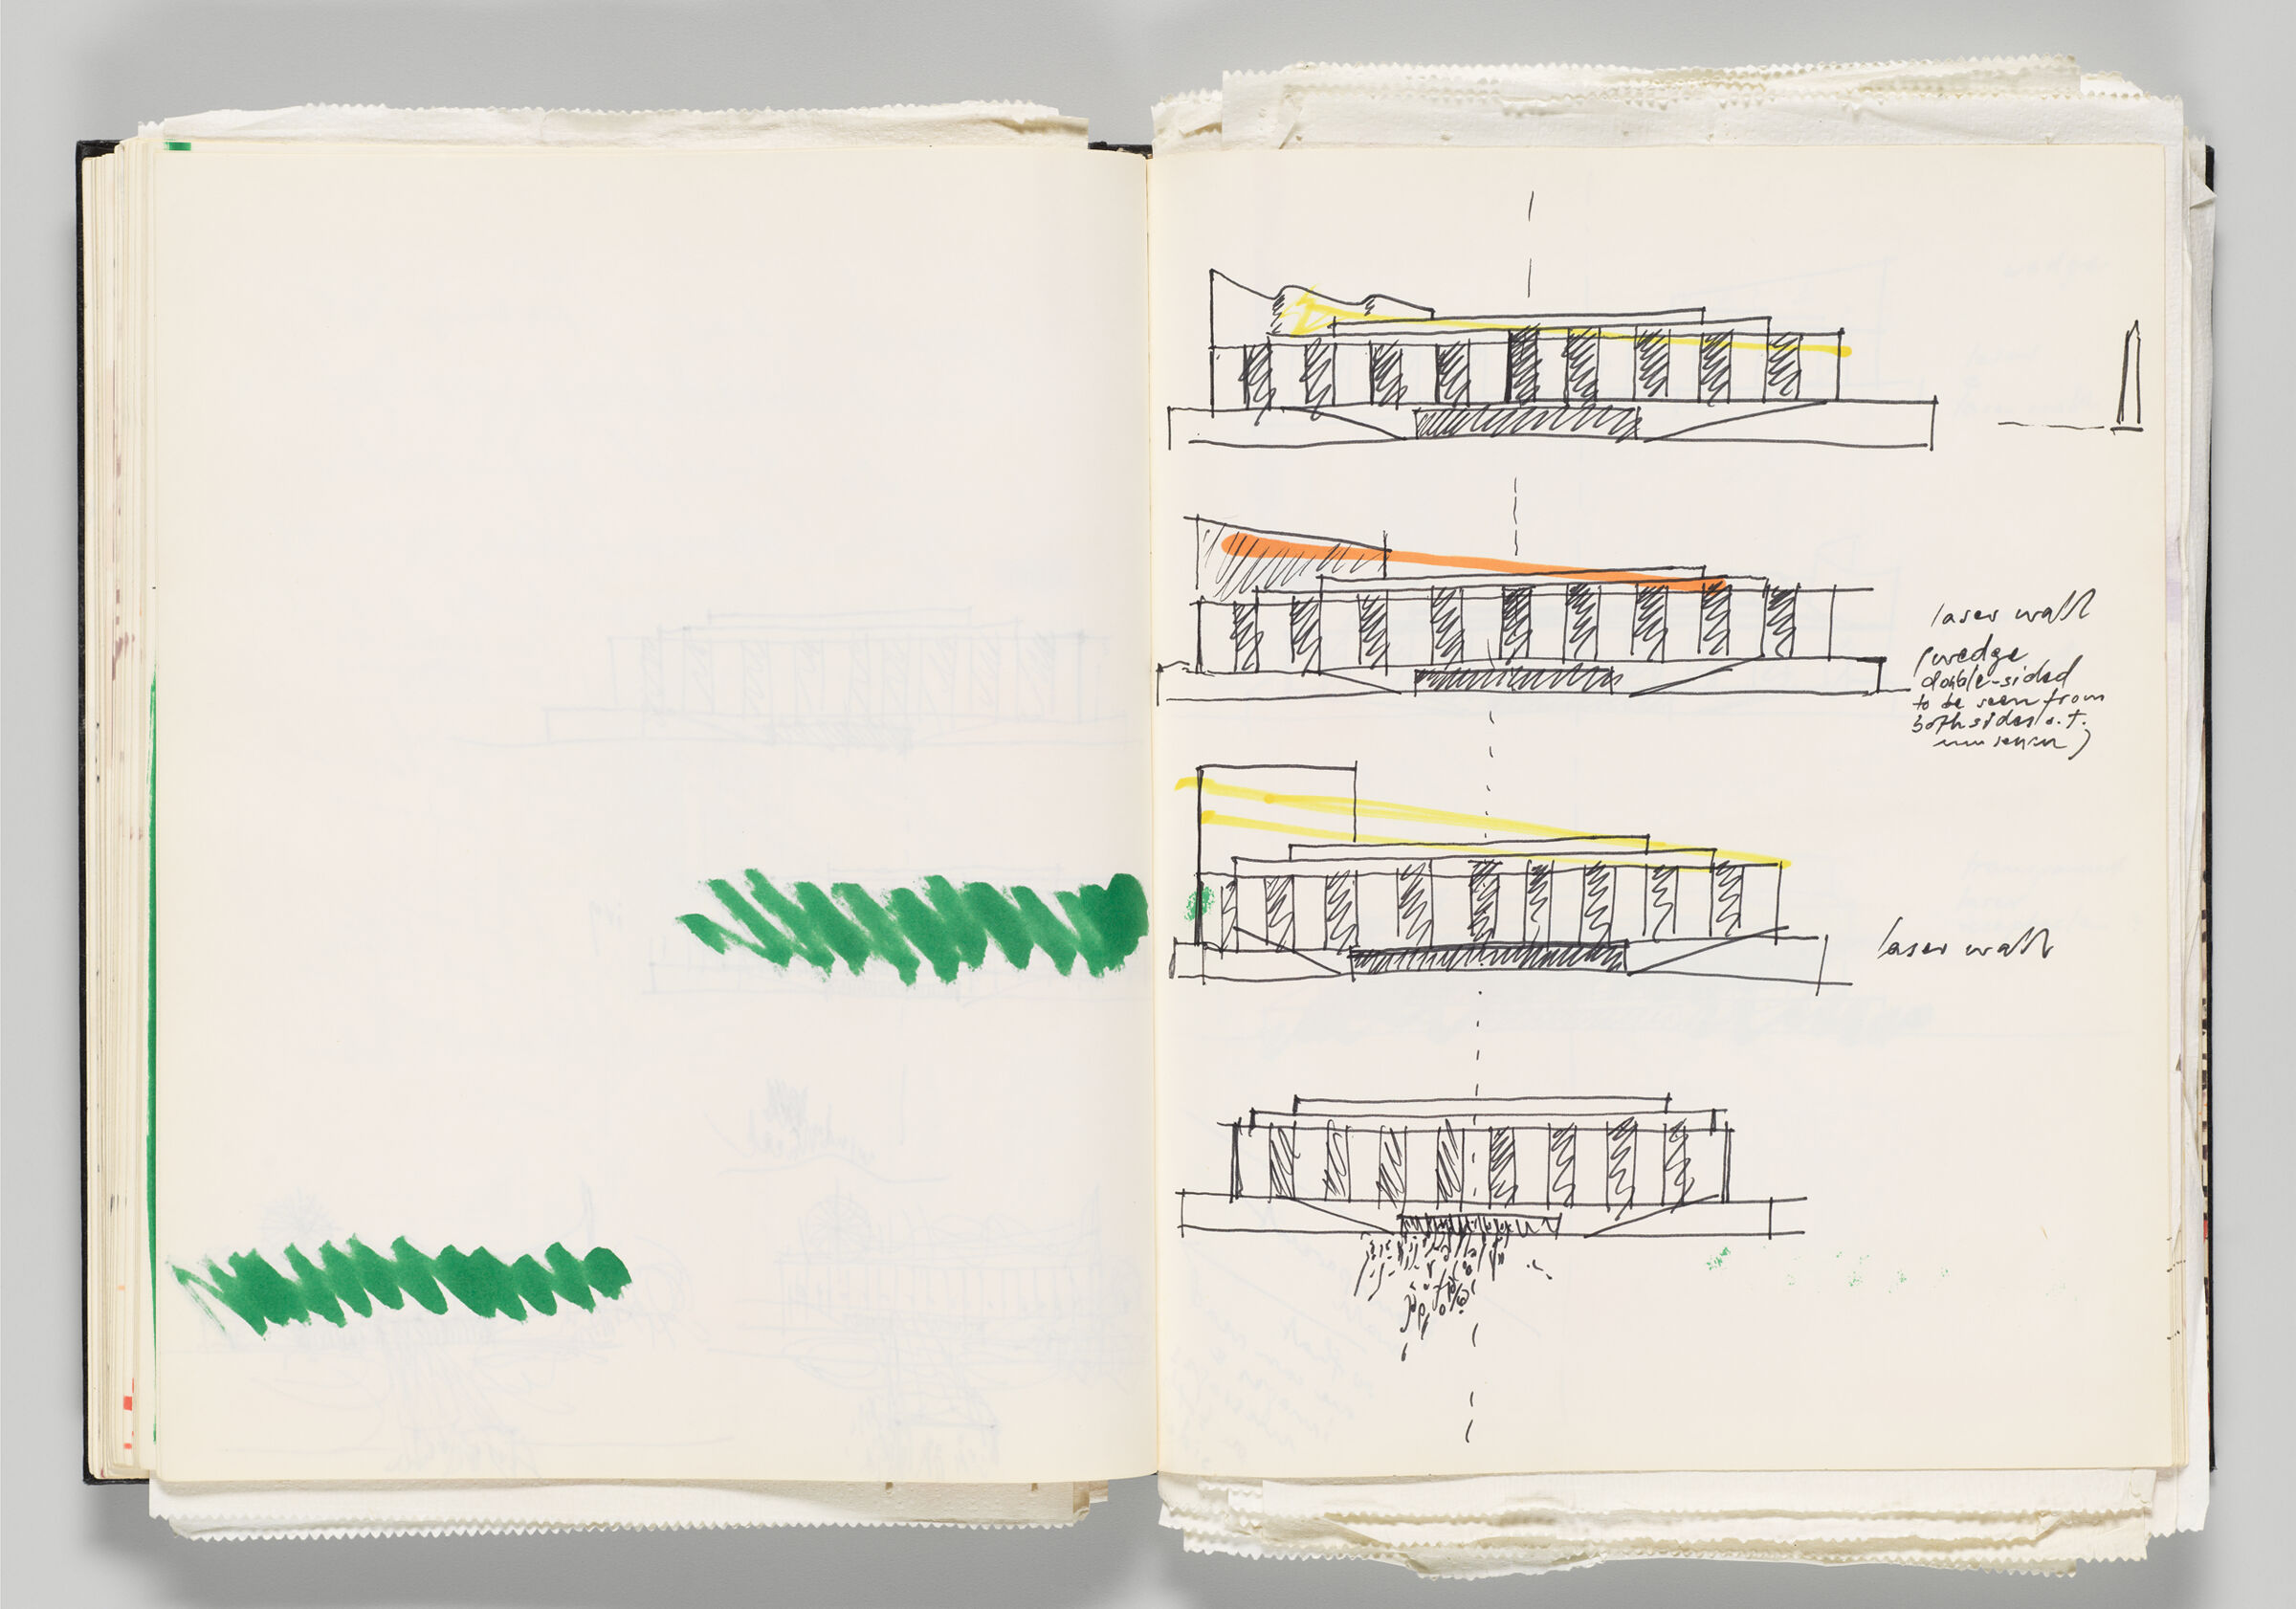 Untitled (Bleed-Through Of Previous Page, Left Page); Untitled (Laser Wall Sketches, Right Page)